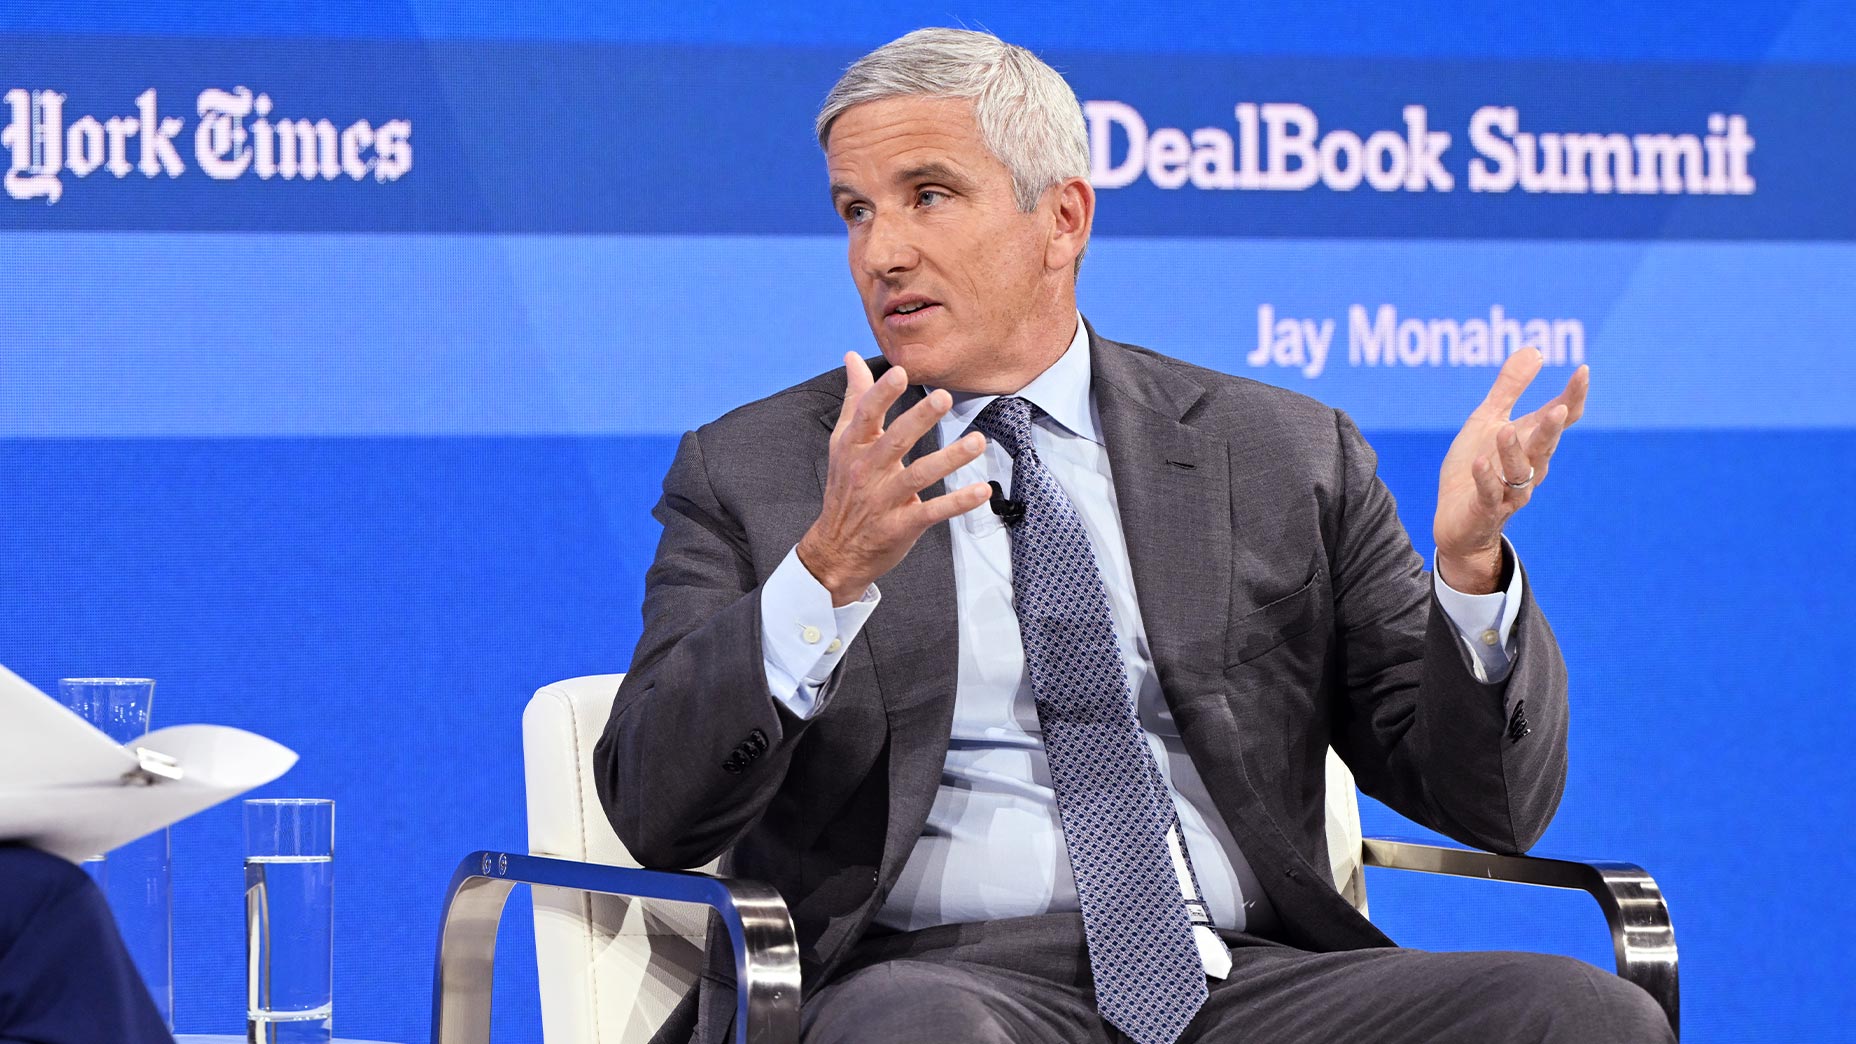 jay monahan speaks in gray suit from stage at NYT Dealbook summit.